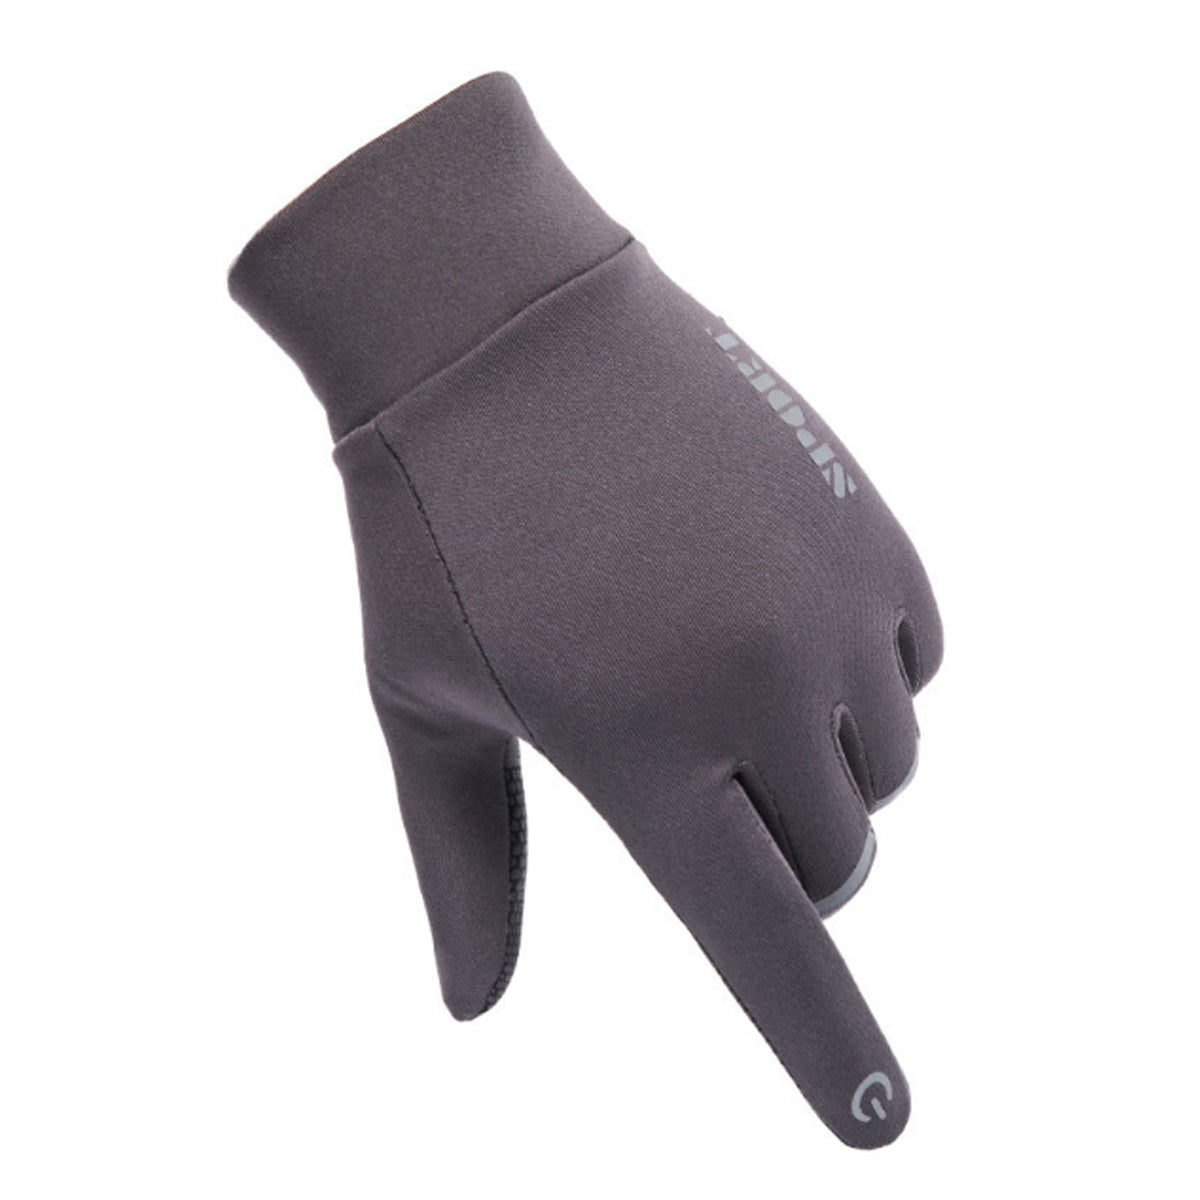 Dim Gray Winter Cycling Warm Windproof Waterproof Anti slip Thermal Touch Screen Gloves